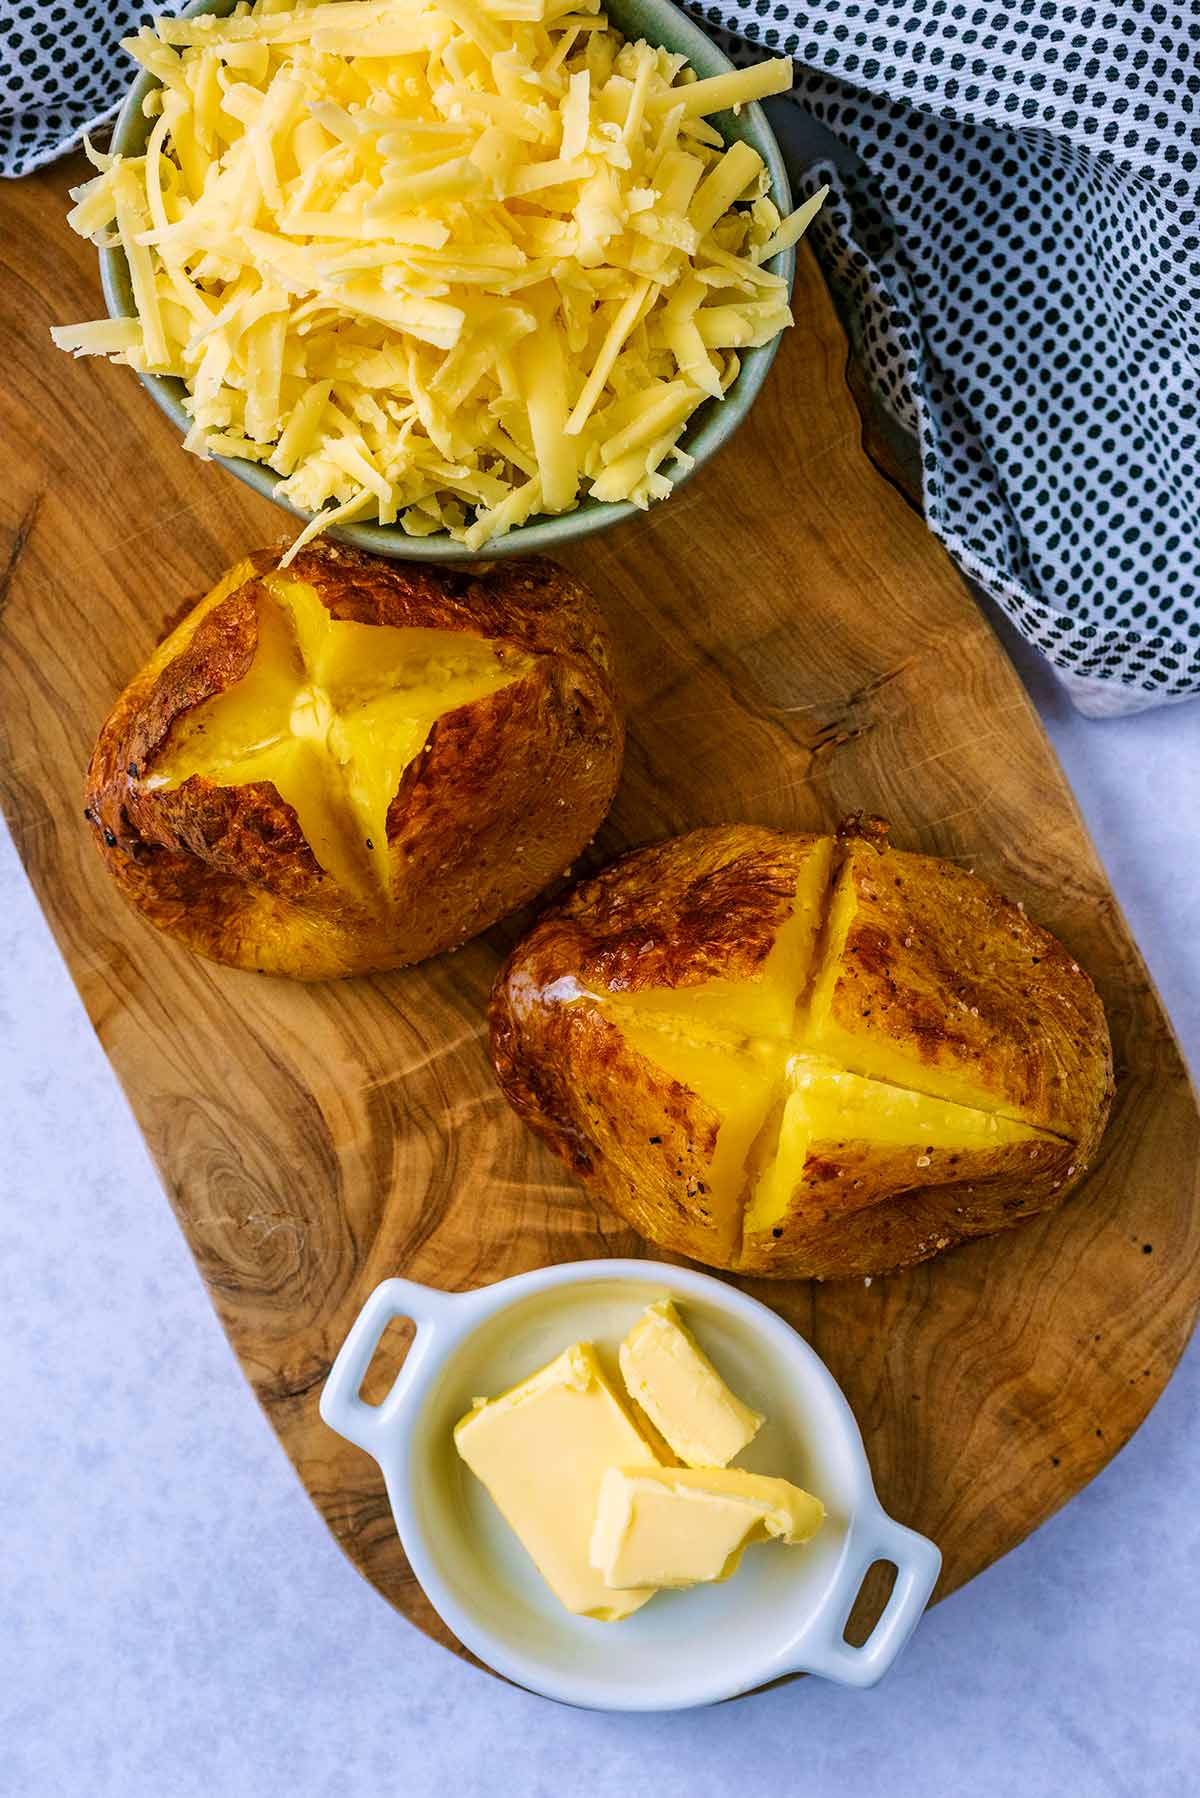 Two jacket potatoes, some grated cheese and a dish of butter on a serving board.